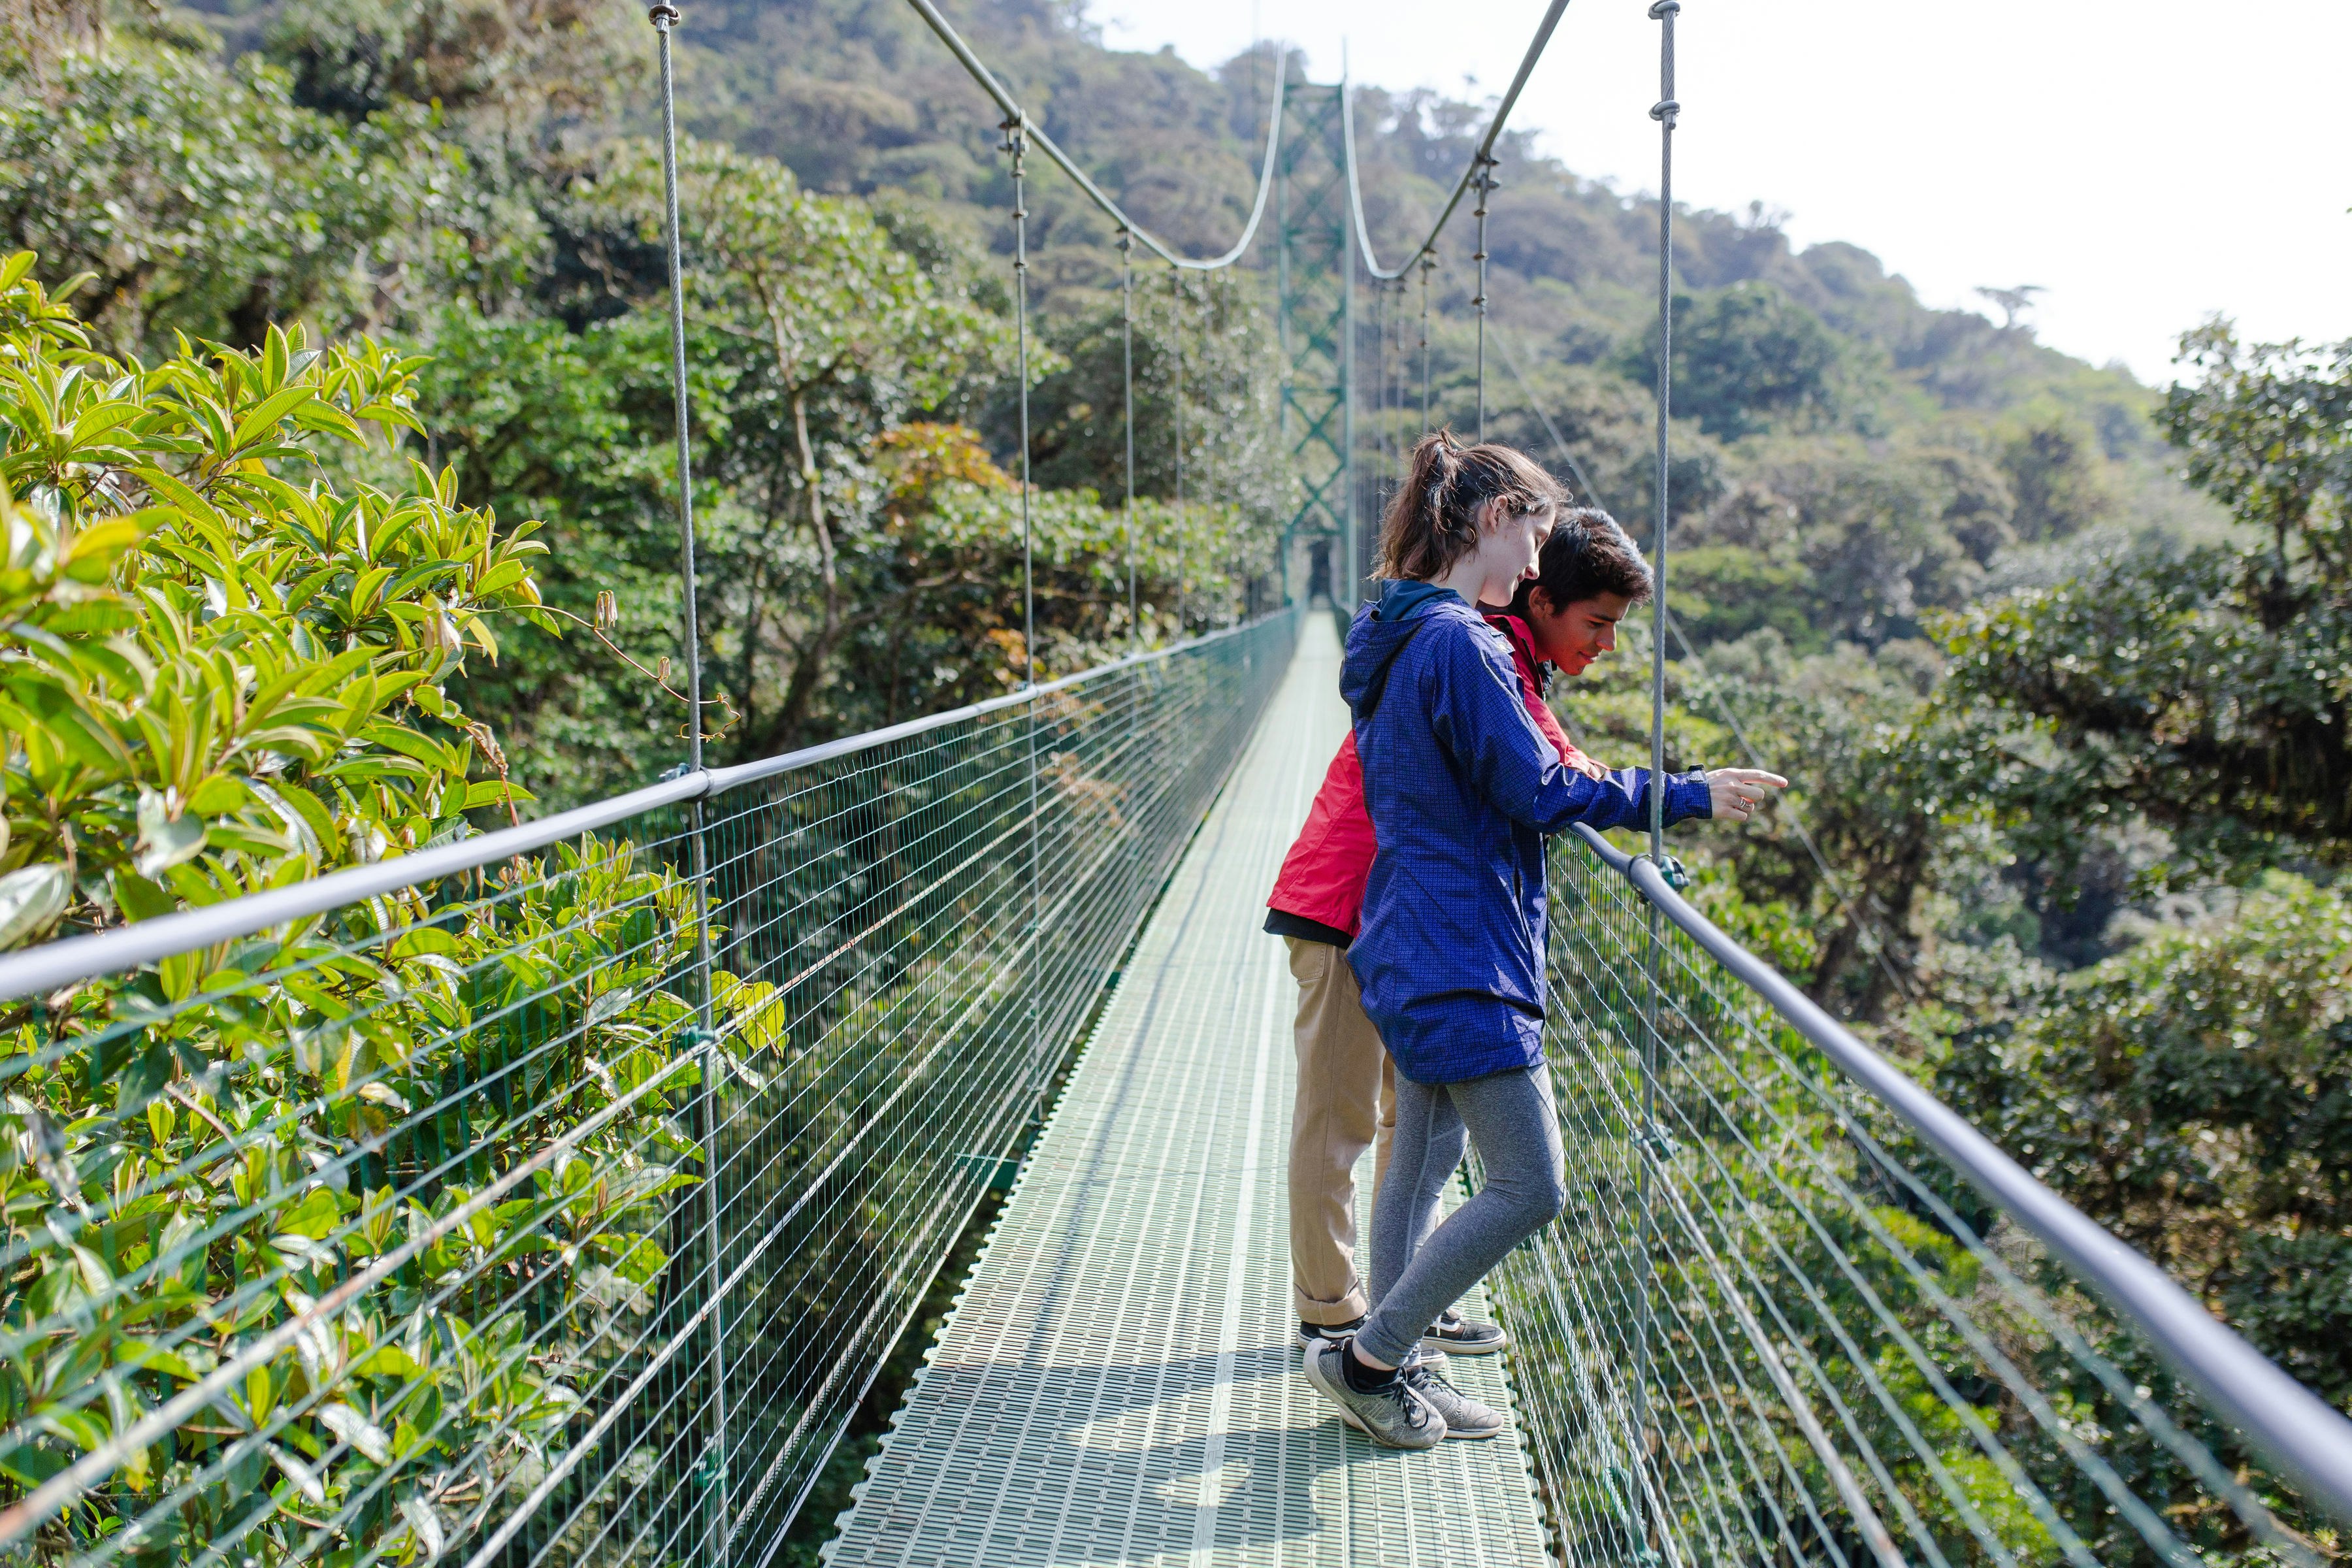 A couple stand on a suspended walkway in the tree tops; the image is looking down the length of the walkway, and it seems to go on forever.